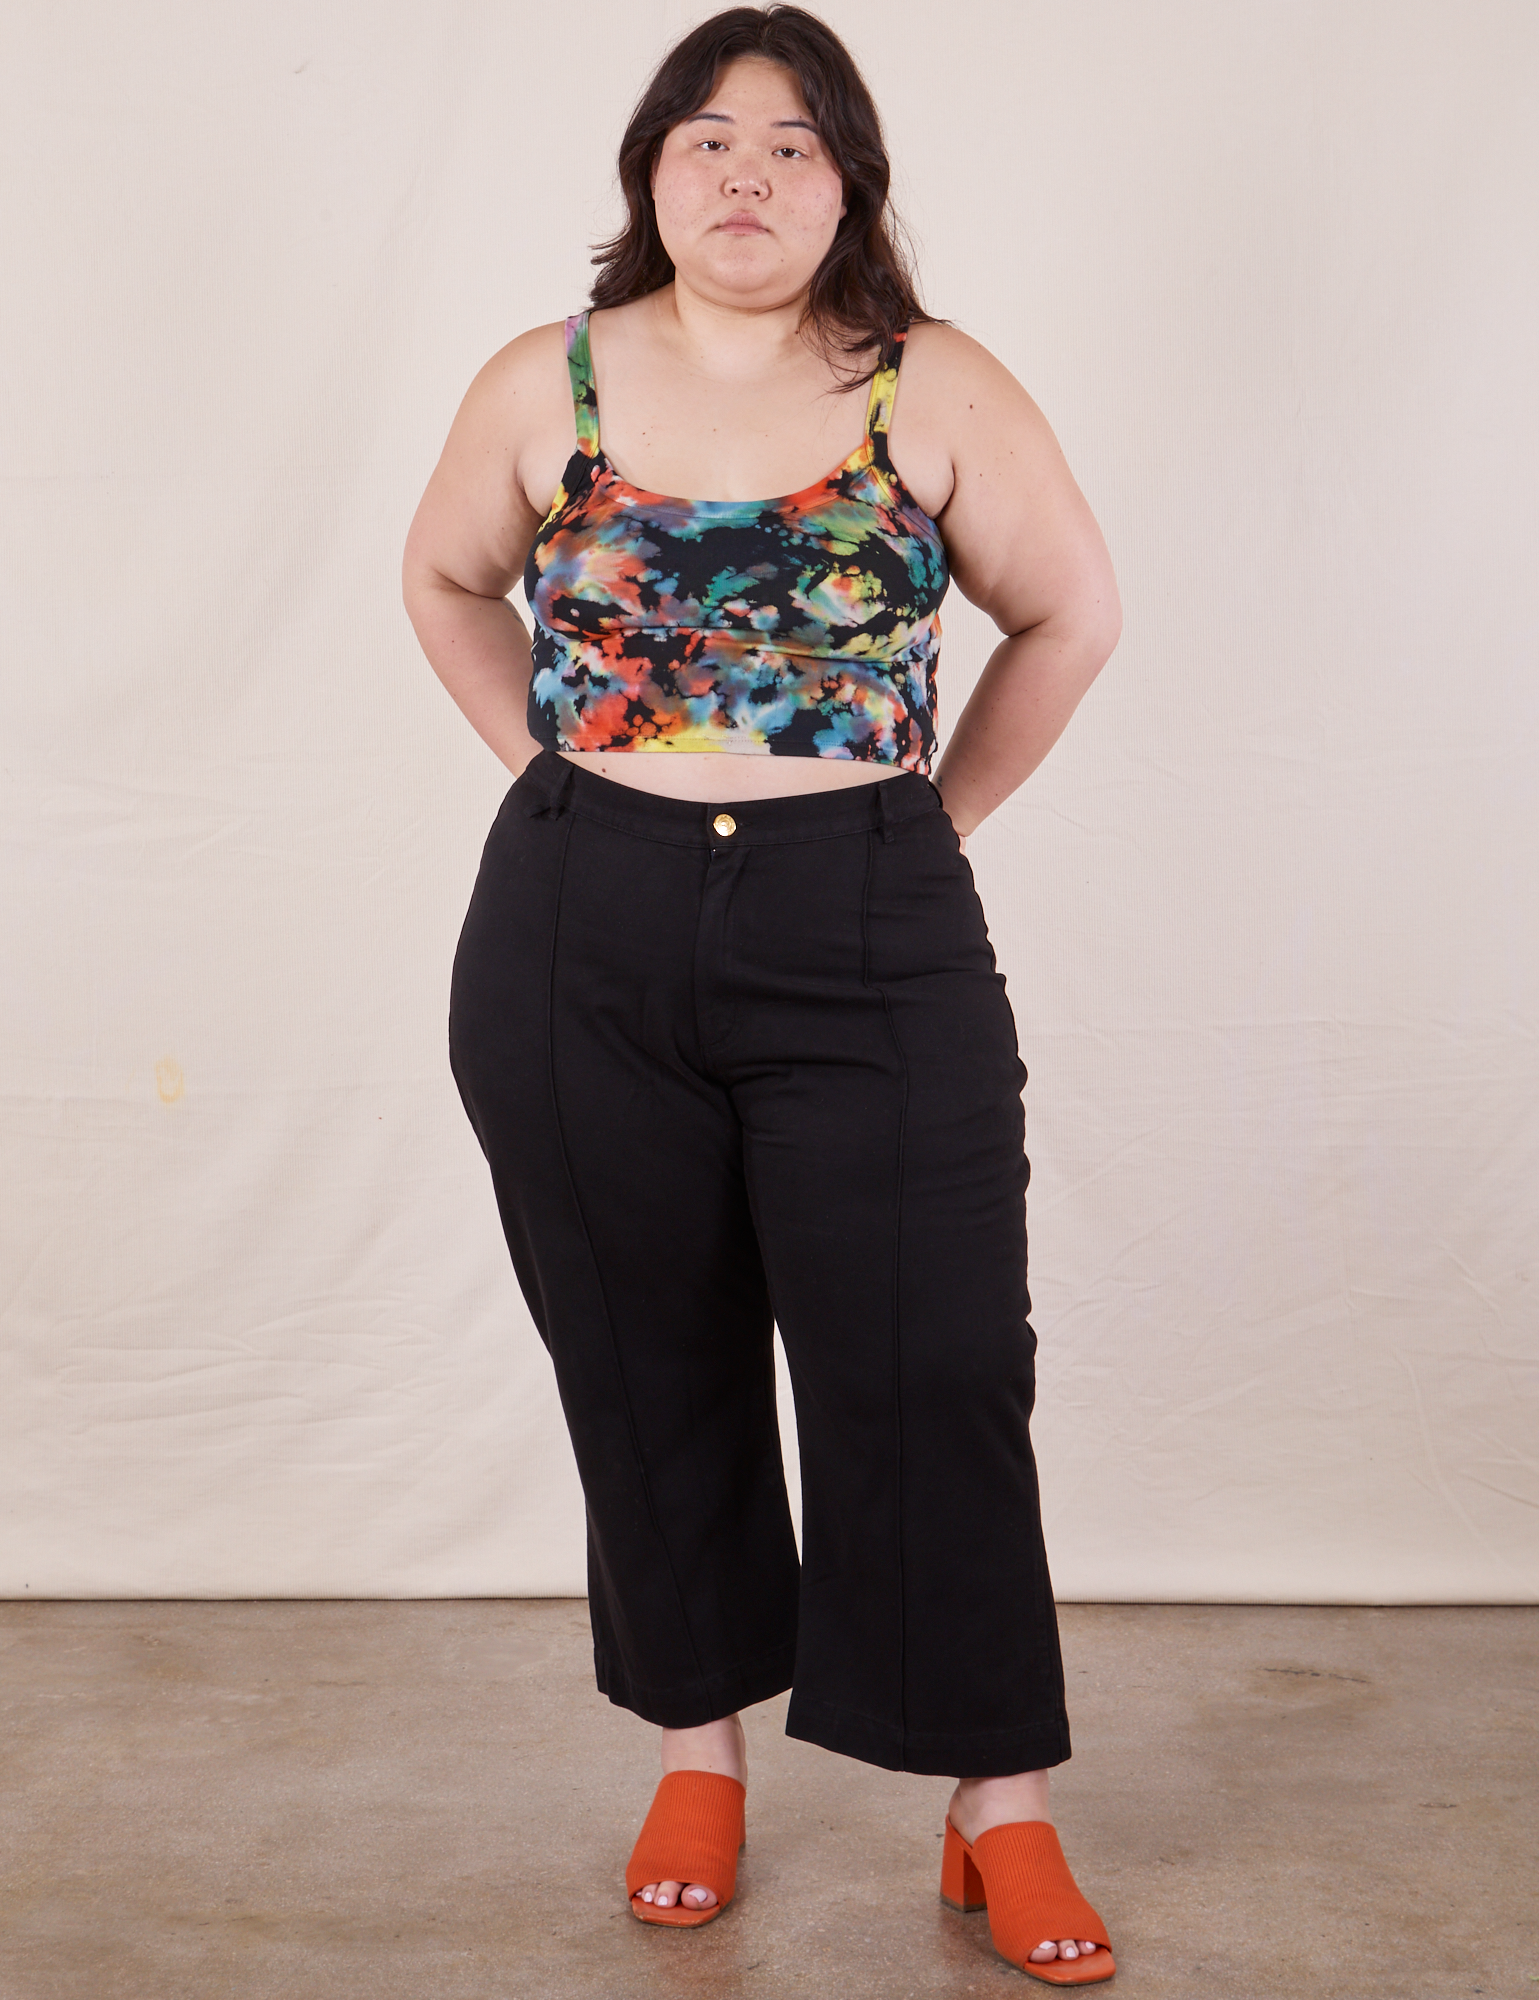 Ashley is wearing Cropped Cami in Rainbow Magic Waters paired with black Petite Western Pants